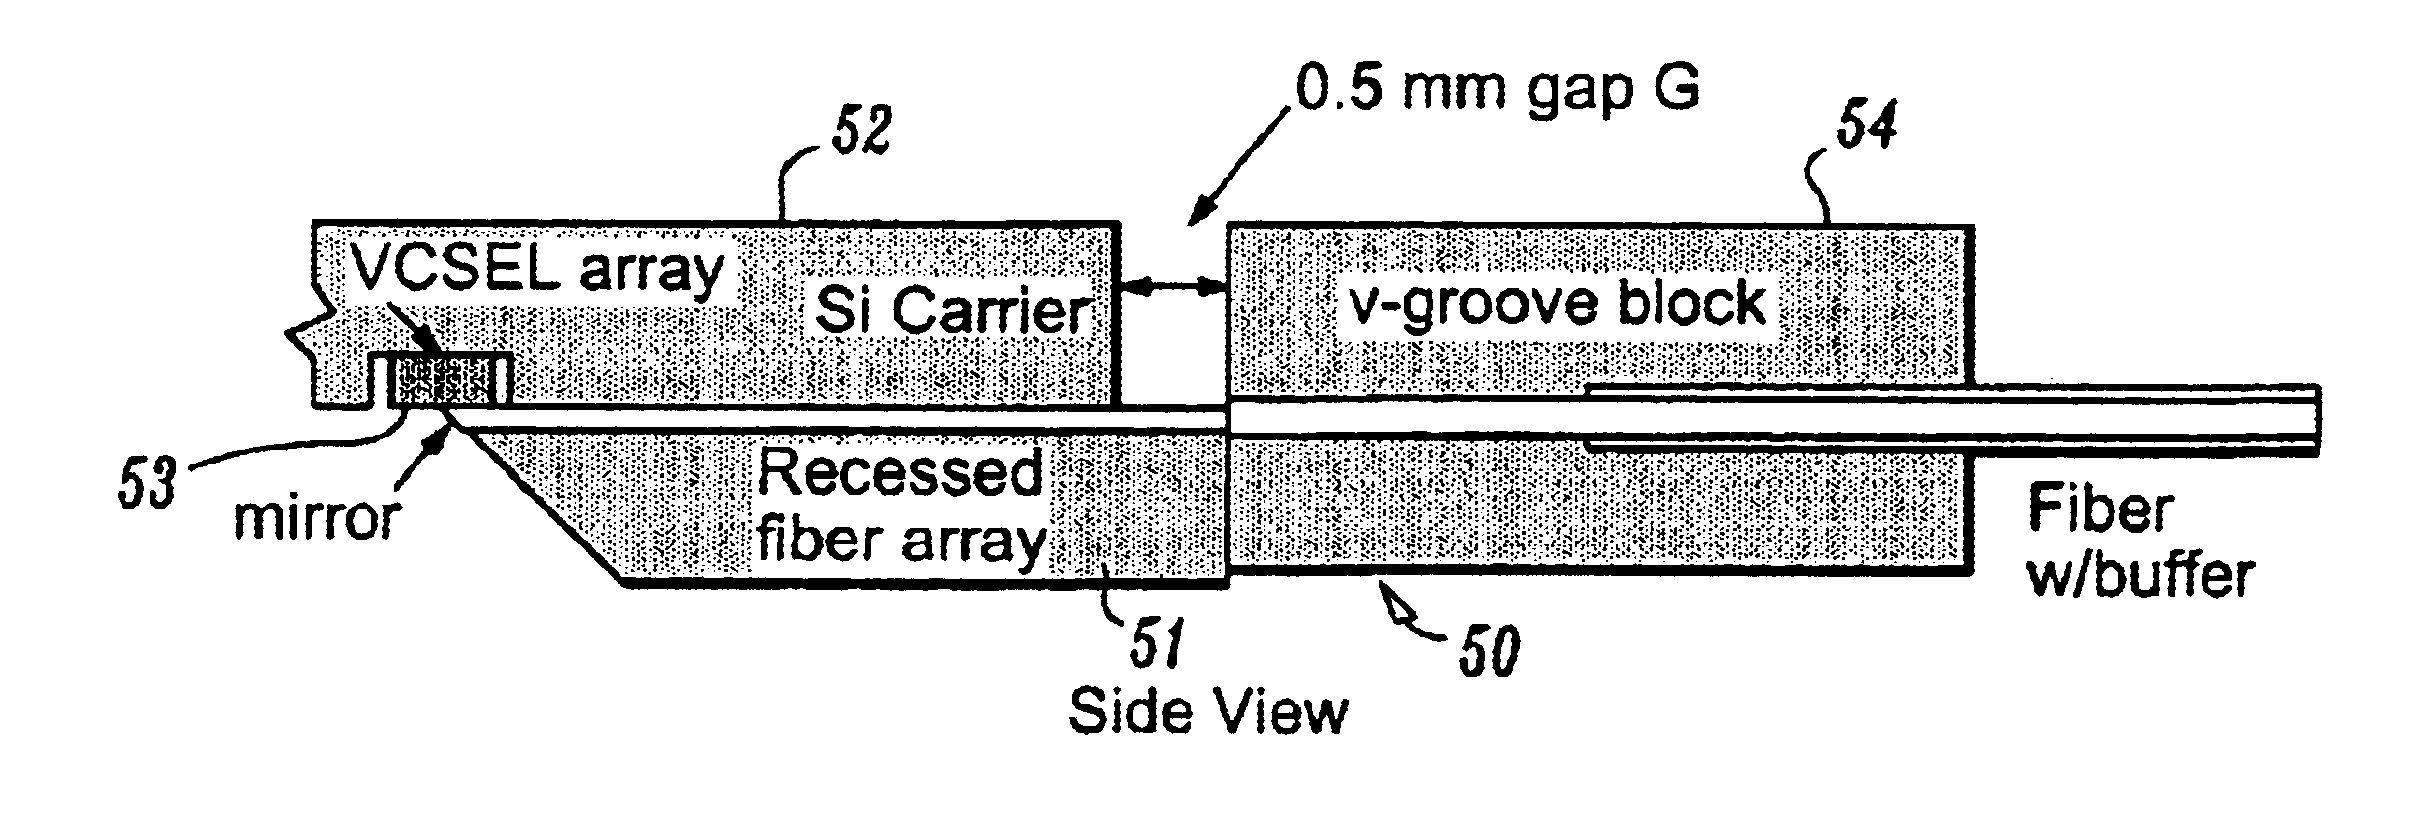 Devices and methods for side-coupling optical fibers to optoelectronic components